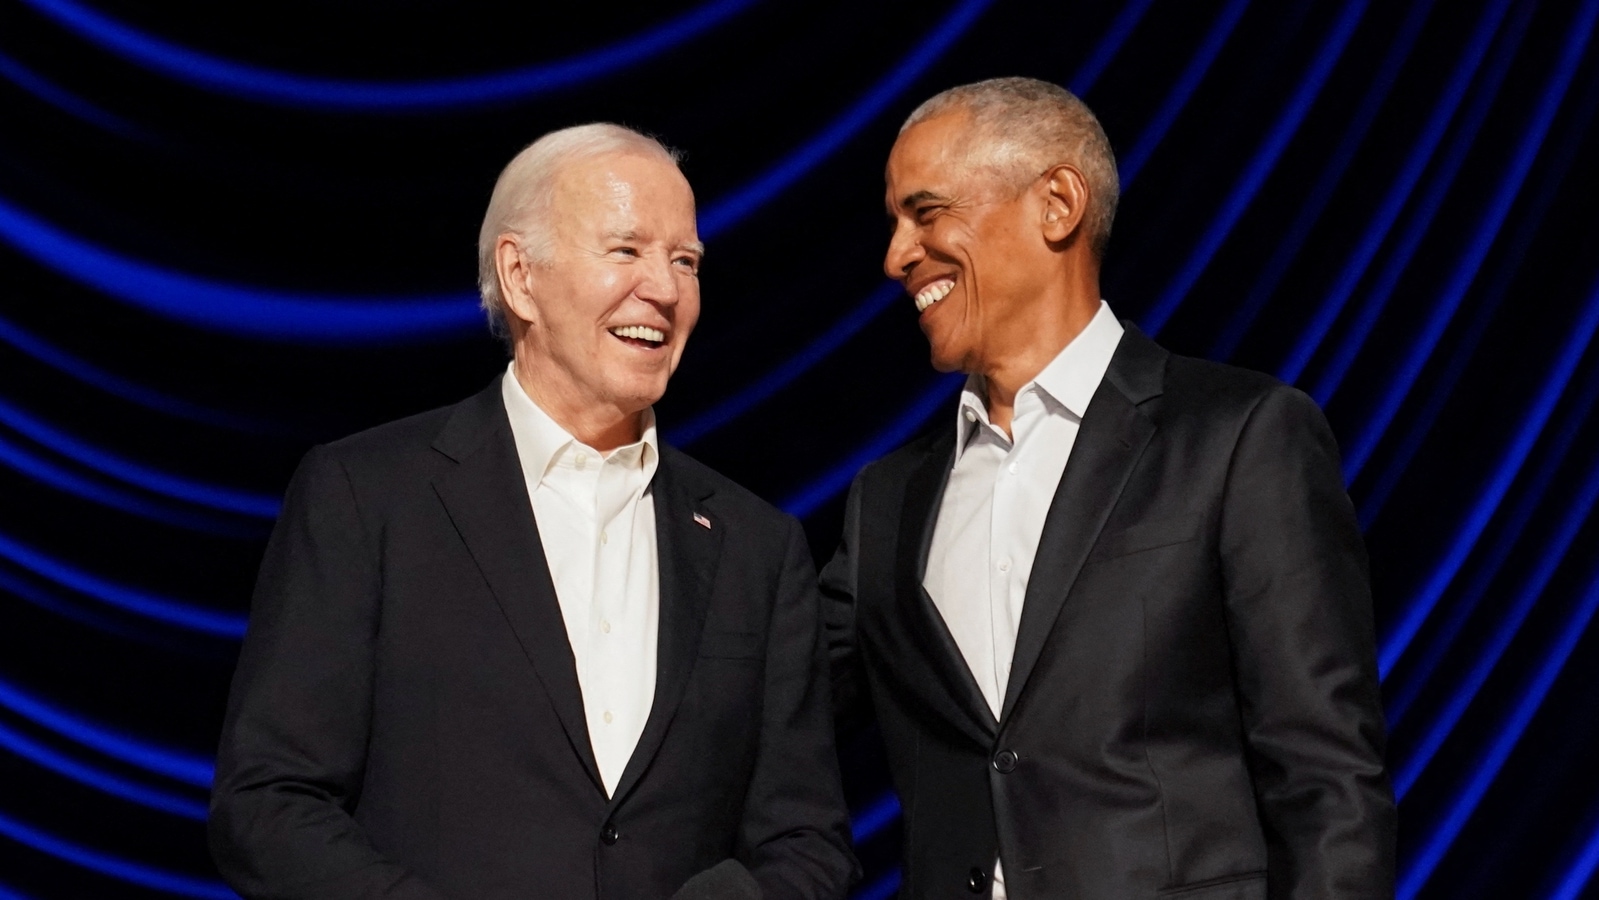 Barack Obama and Nancy Pelosi privately discuss Joe Biden's campaign, ‘they want him to….’